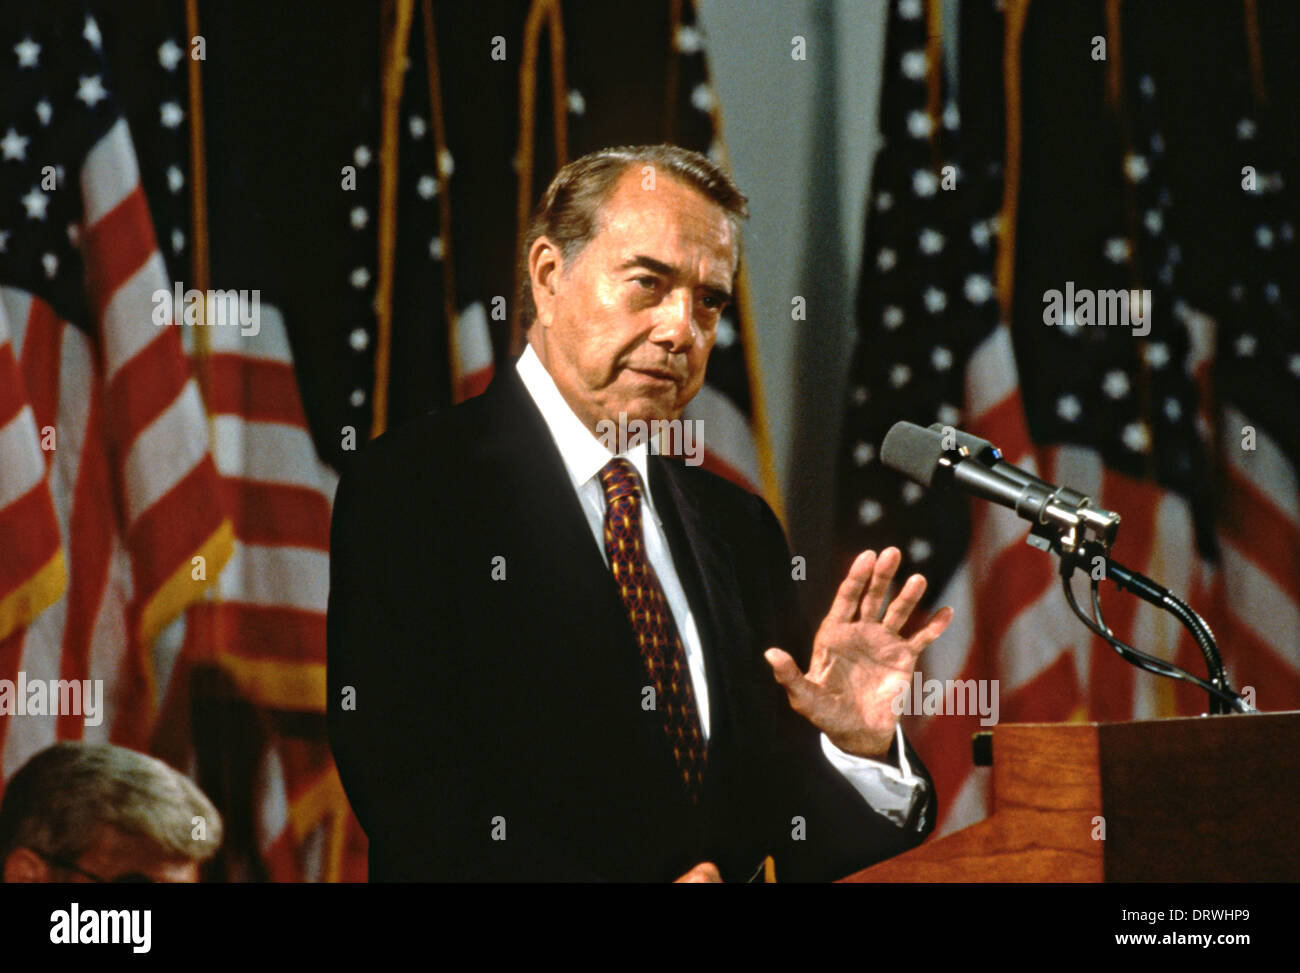 Republican US Senator Bob Dole during a campaign stop in the 1996 Presidential election September 11, 1996 in Washington, DC. Stock Photo